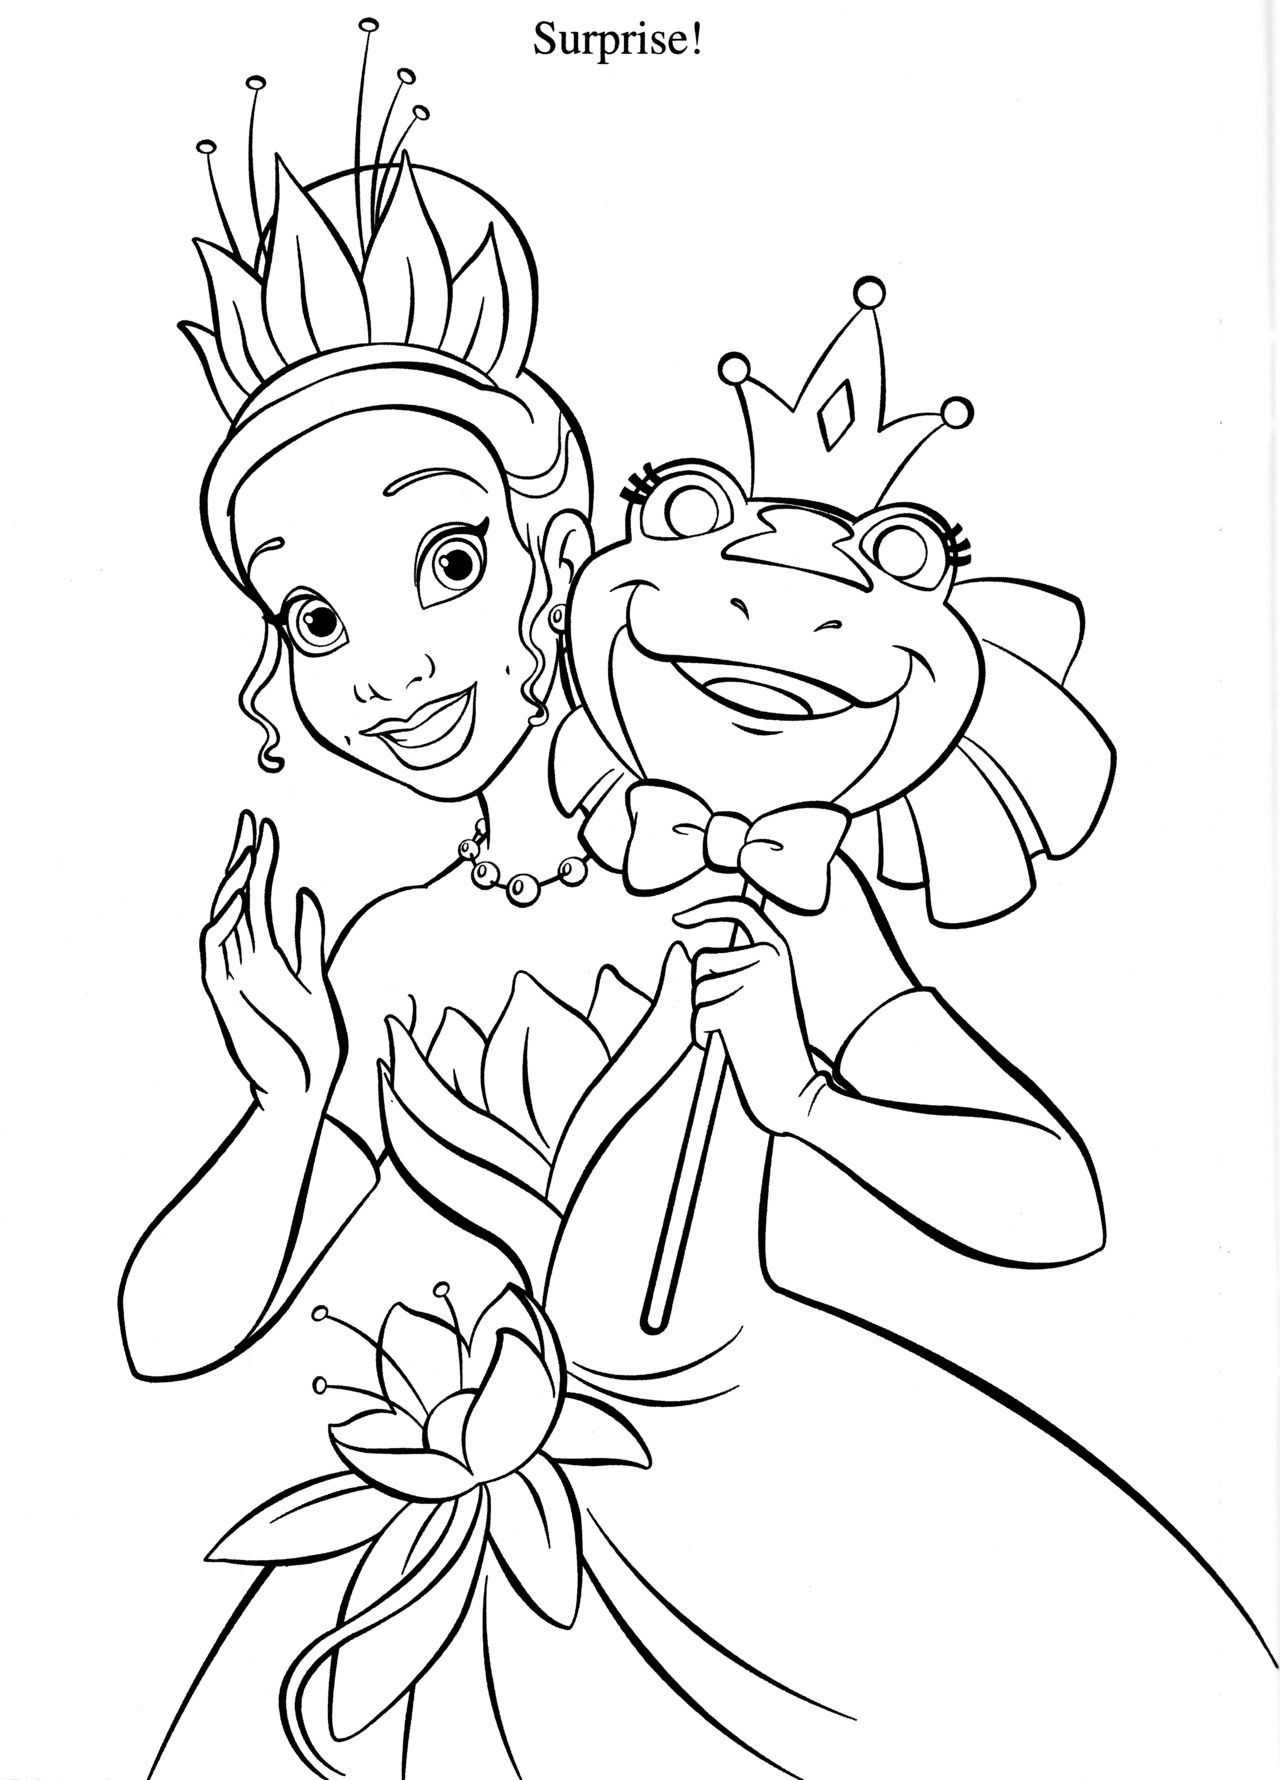 The Princess & the Frog Coloring Page